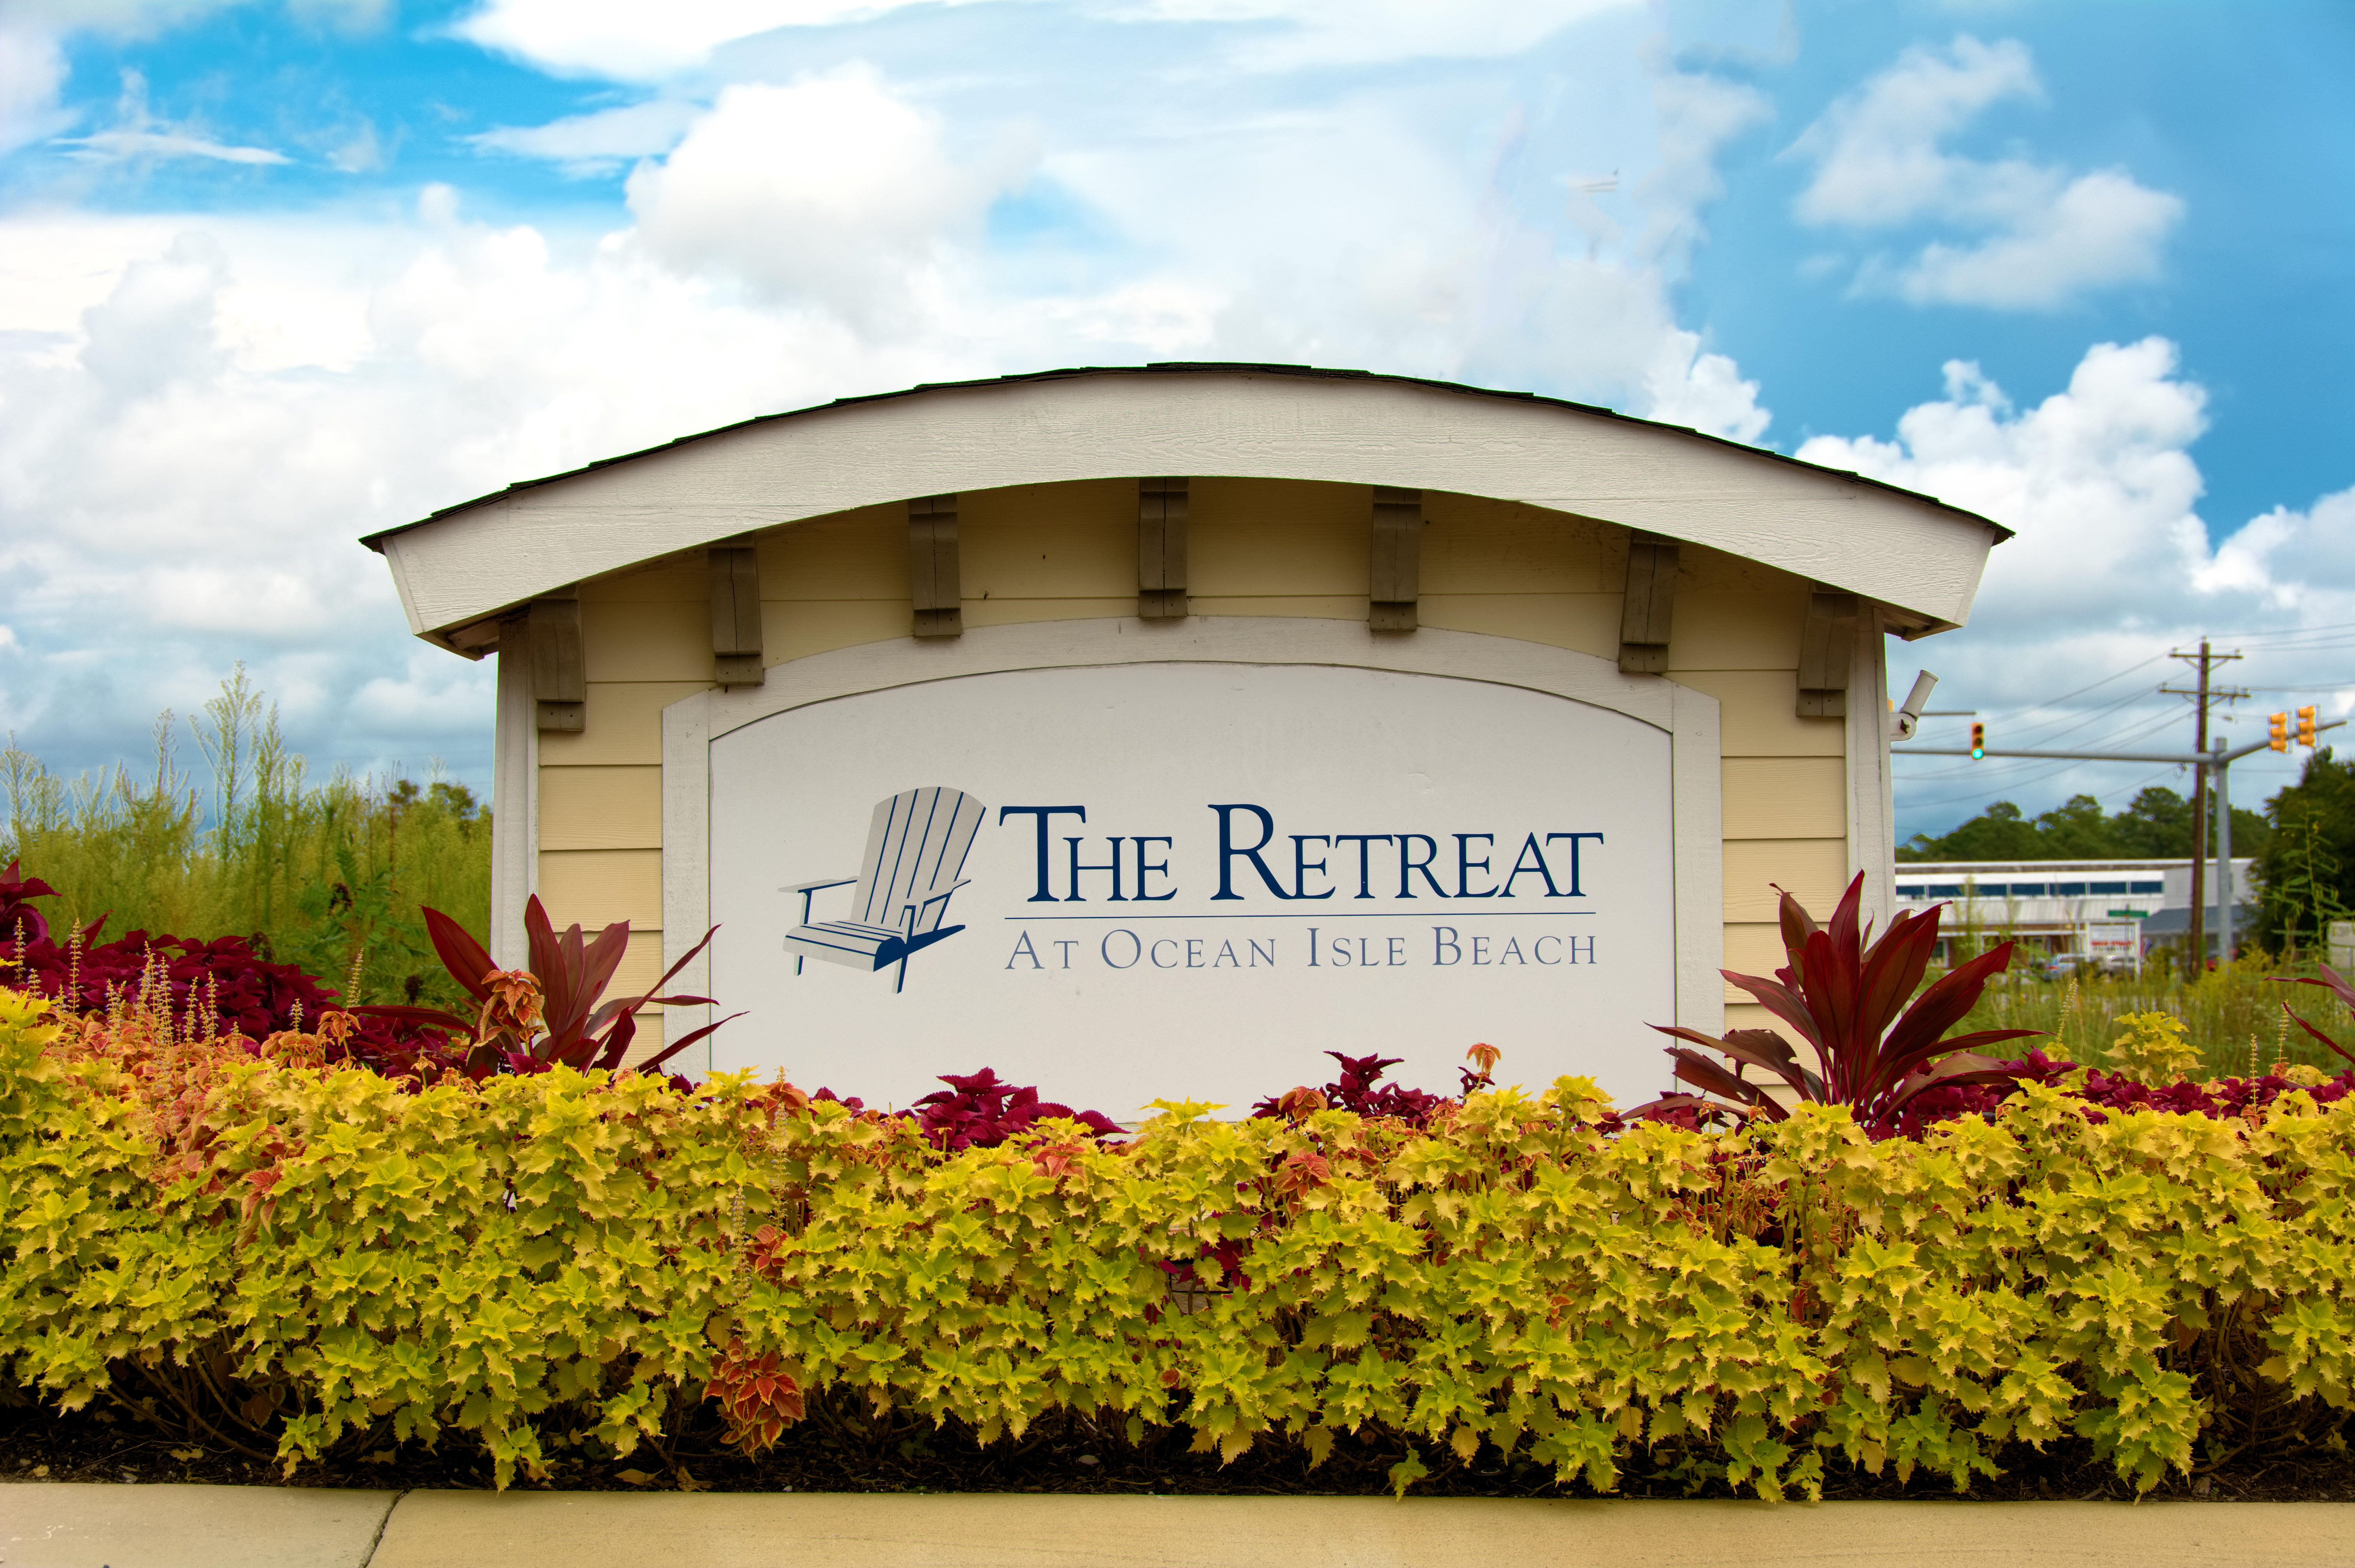 The Retreat Ocean Isle Beach New Resale Homes For Sale This